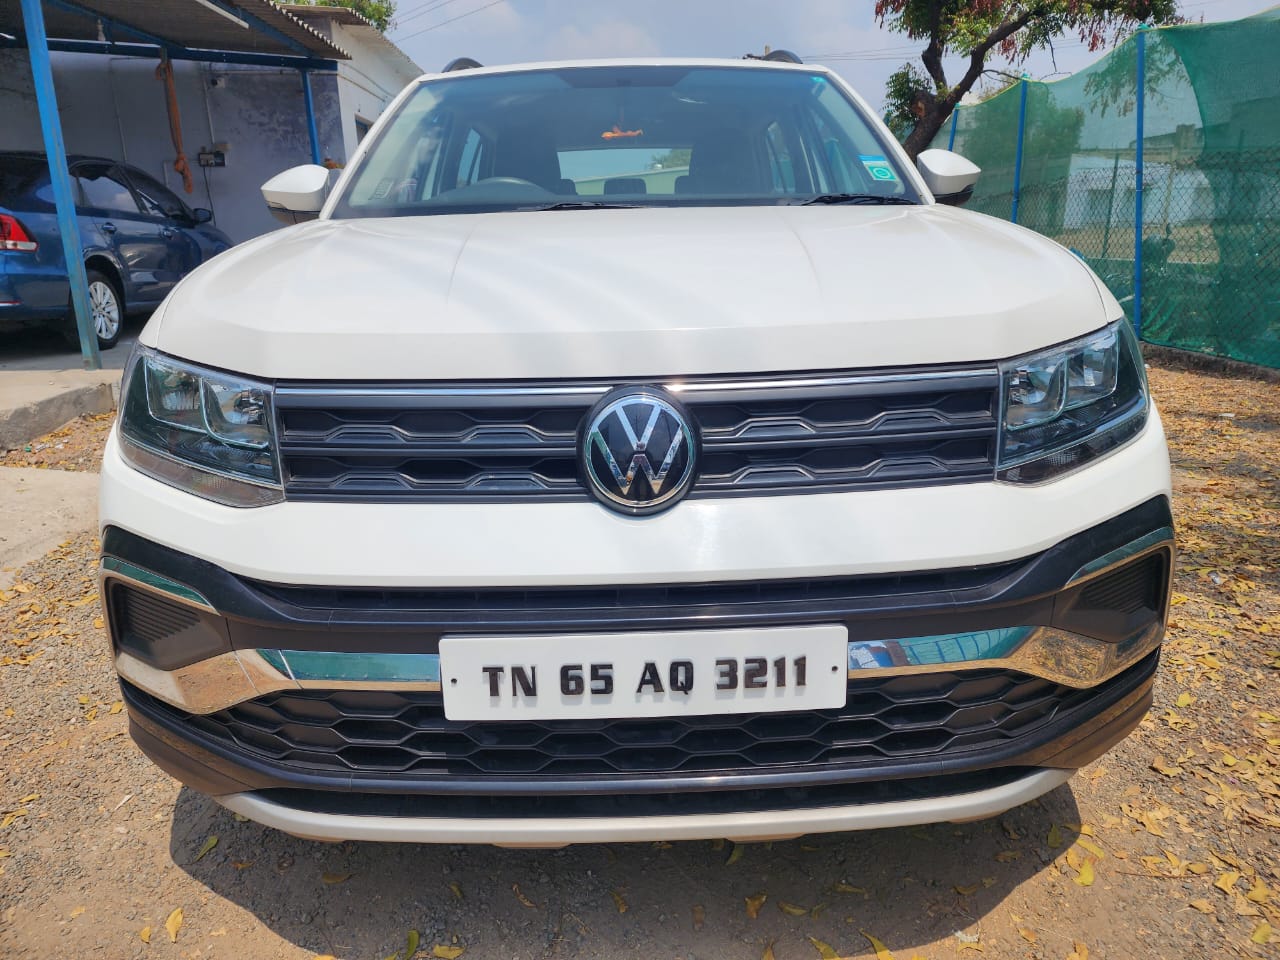 6480-for-sale-Volks-Wagen-Tiguan-Petrol-First-Owner-2021-TN-registered-rs--1